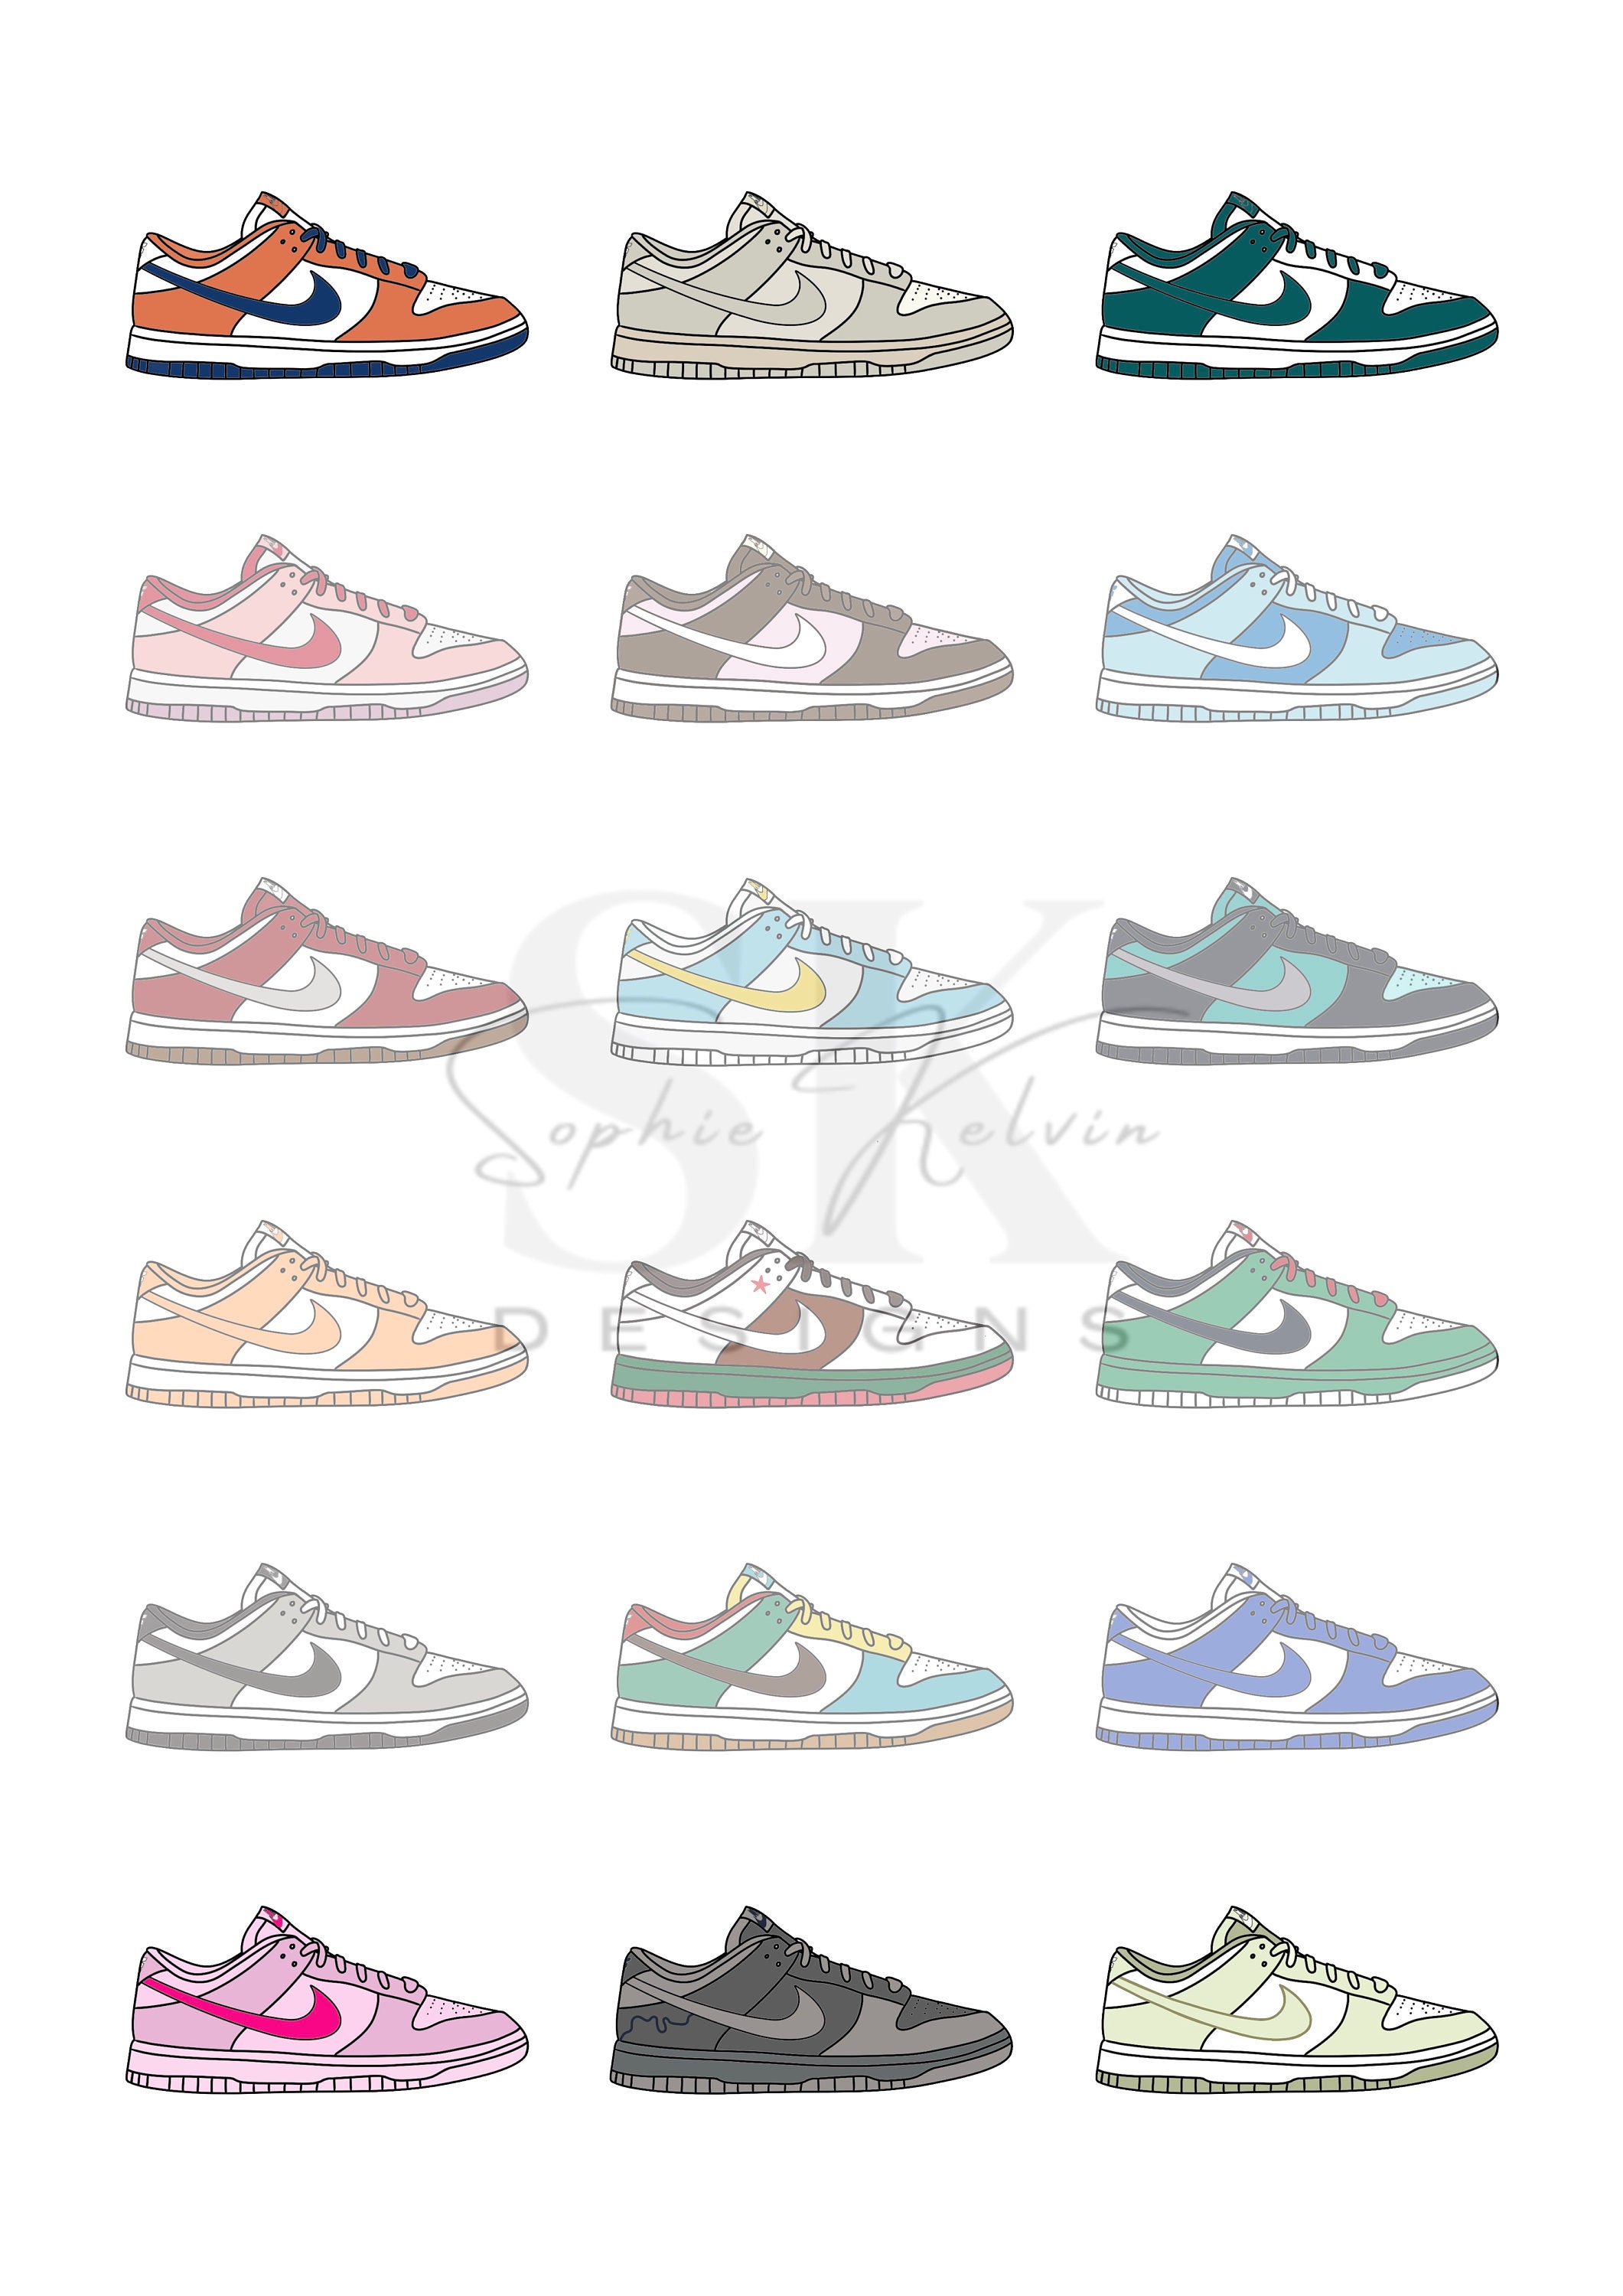 Dunk Sneakers Poster - Etsy